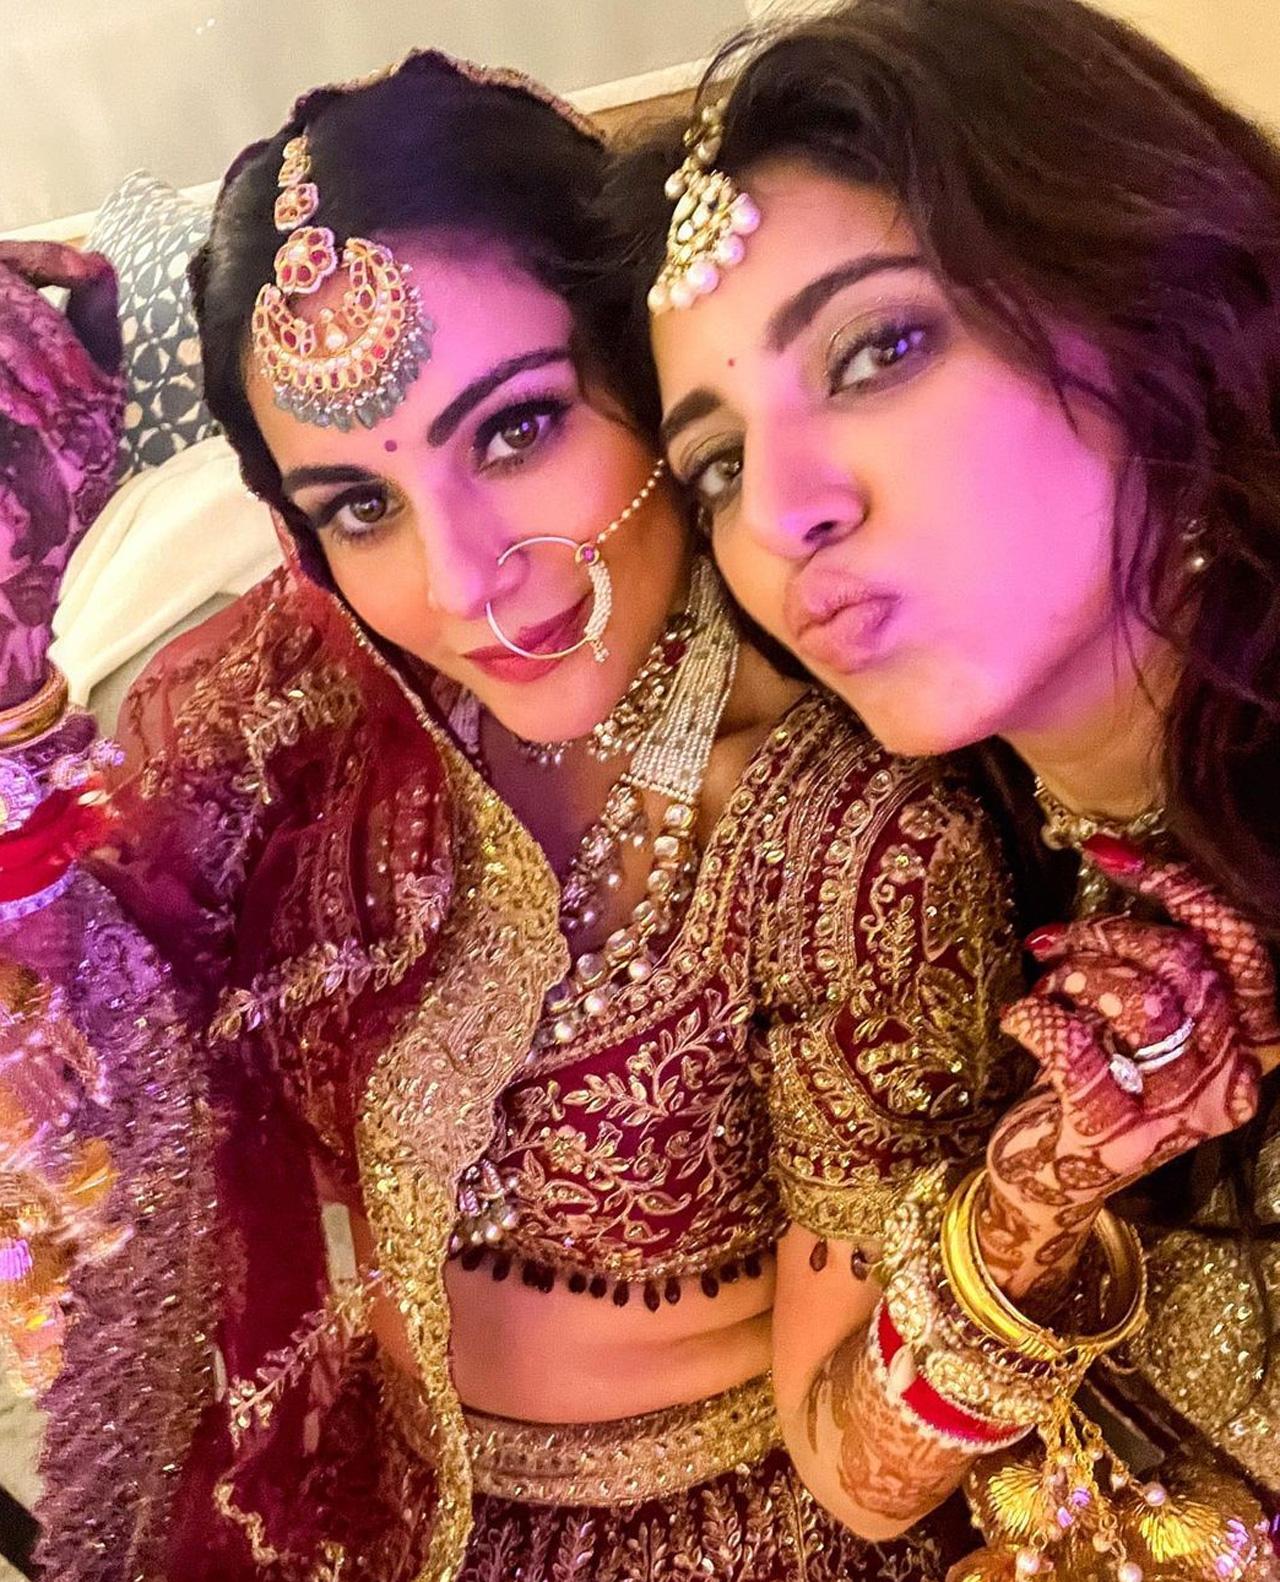 Celebrity stylist Neha Adhvik Mahajan and good friend of the recent bride of Tinsel Town Shraddha Arya, shared some stunning and gorgeous pictures of her on Instagram and gave a glimpse of her wedding festivities, from the wedding to the Mehendi ceremony.